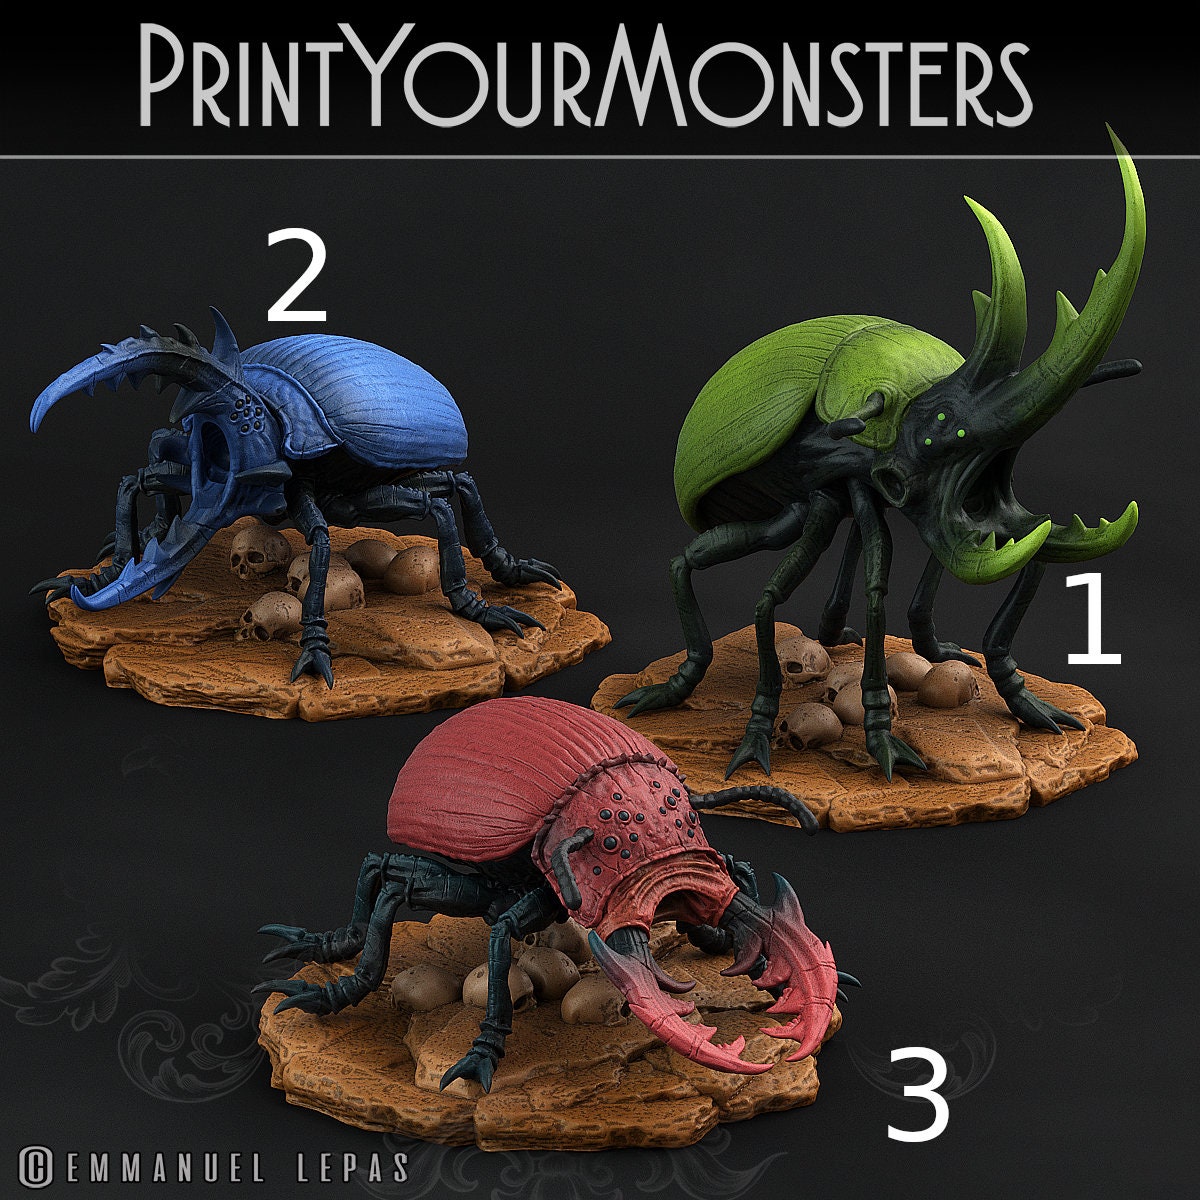 Giant Beetle - Print Your Monsters 